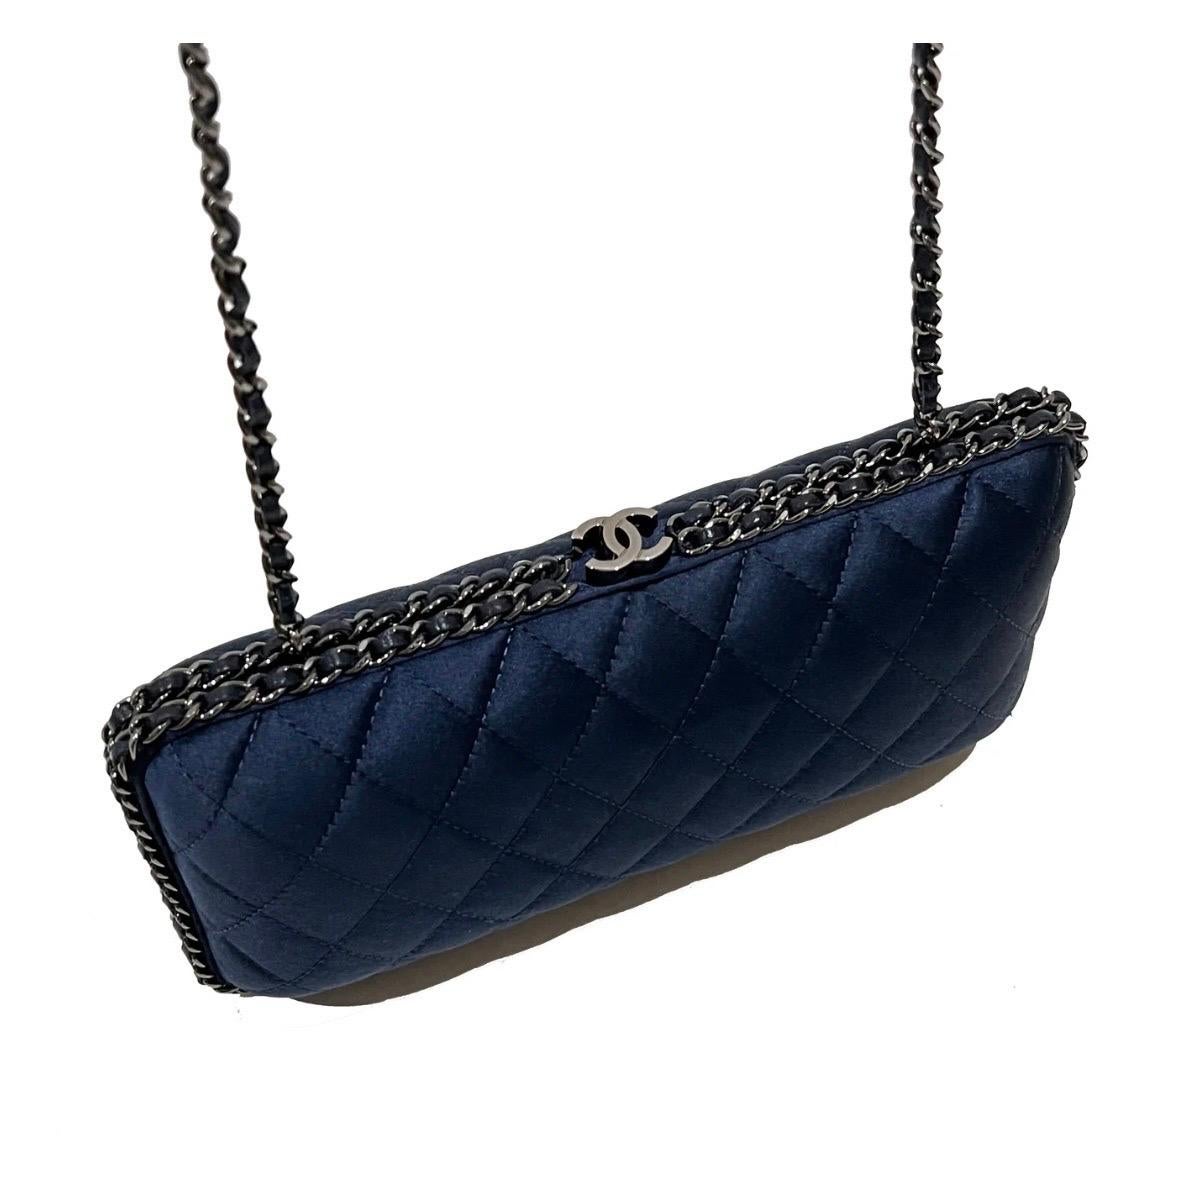 Navy Chain Around Clutch by Chanel  
Pre-Fall 2012
Navy blue quilted satin exterior 
Gun-metal toned hardware 
Top CC snap closure   
Single interior compartment 
Optional woven chain shoulder strap 
Excellent condition, no visible